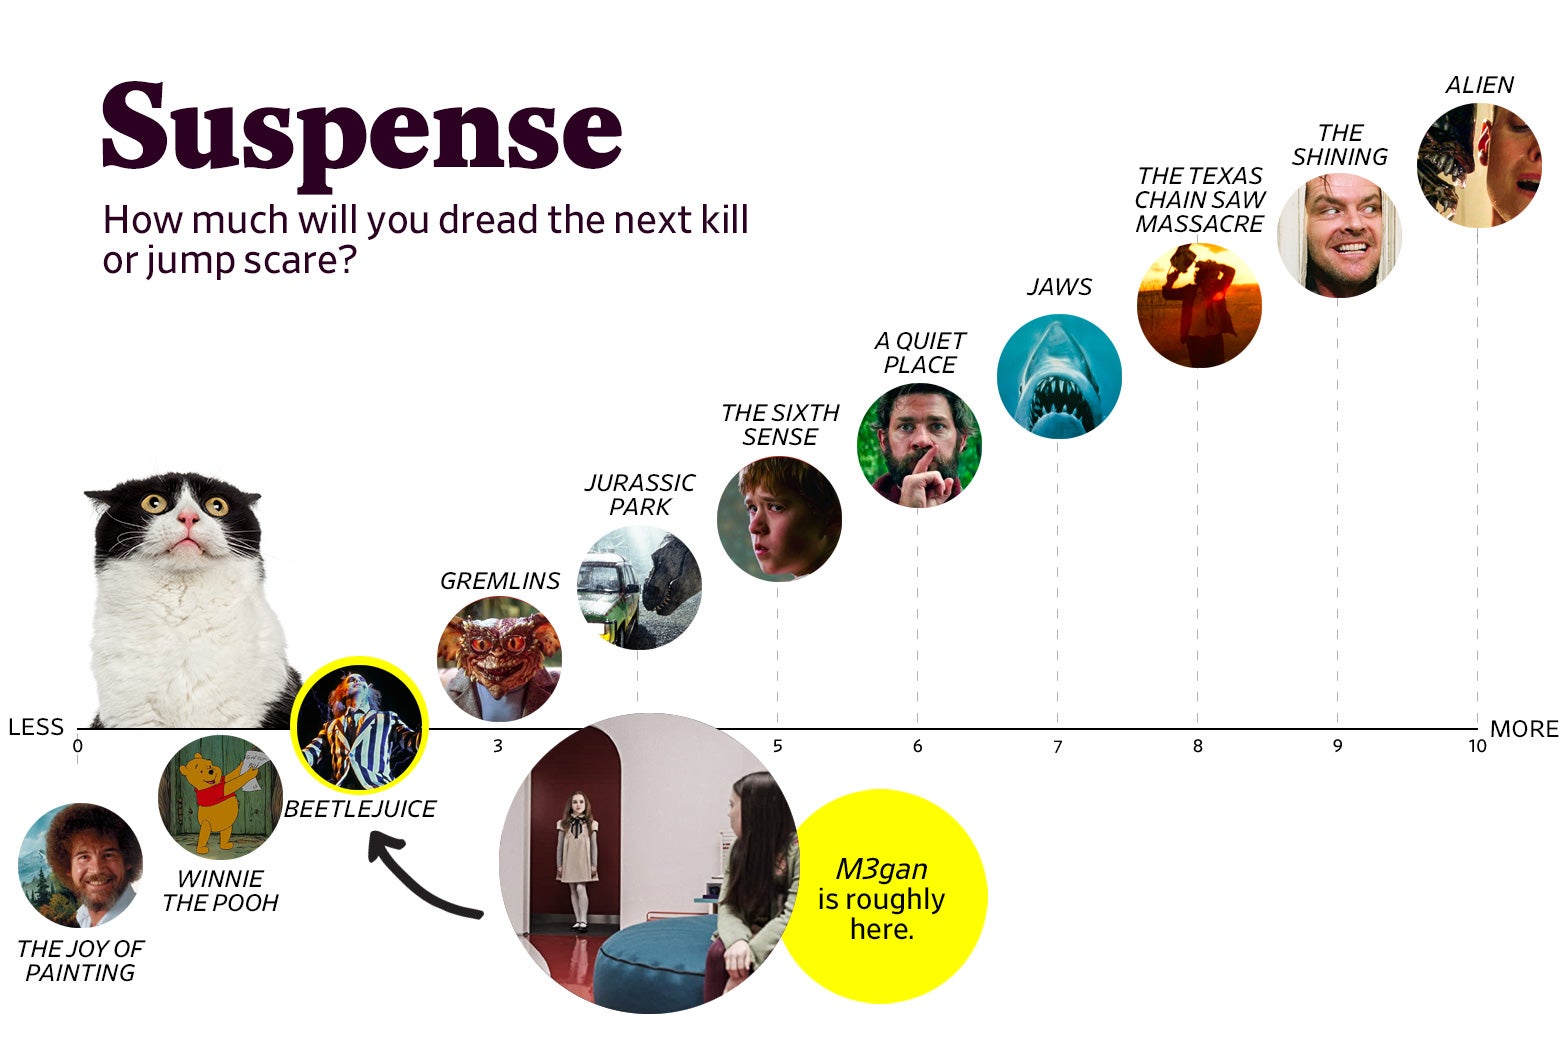 A chart titled “Suspense: How much will you dread the next kill or jump scare?” shows that M3gan ranks a 2 in suspense, roughly the same as Beetlejuice. The scale ranges from The Joy of Painting (0) to Alien (10).  